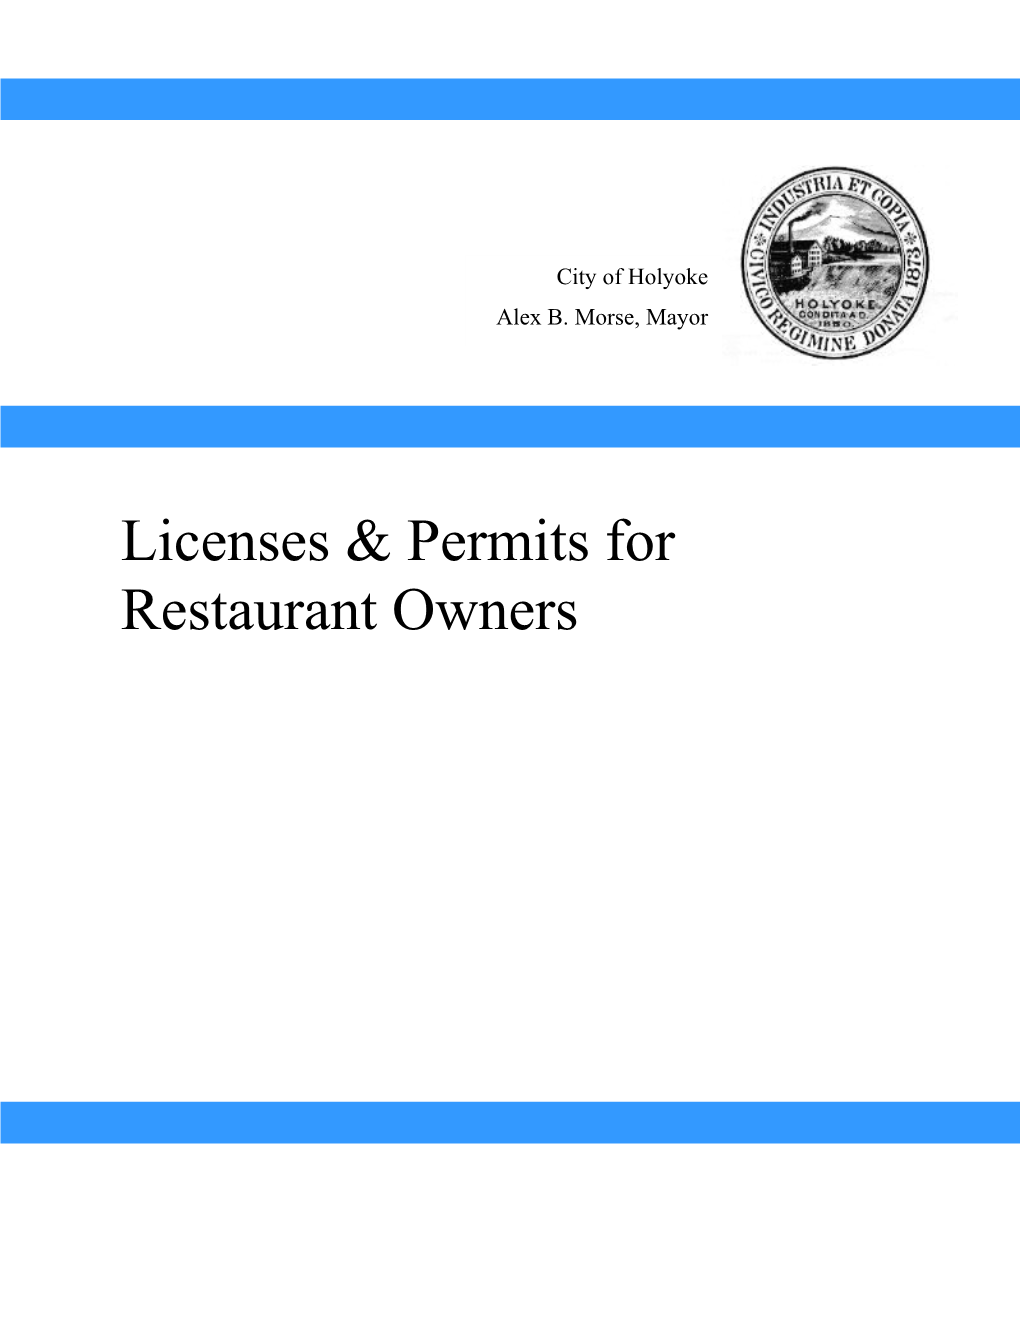 Licenses & Permits for Restaurant Owners